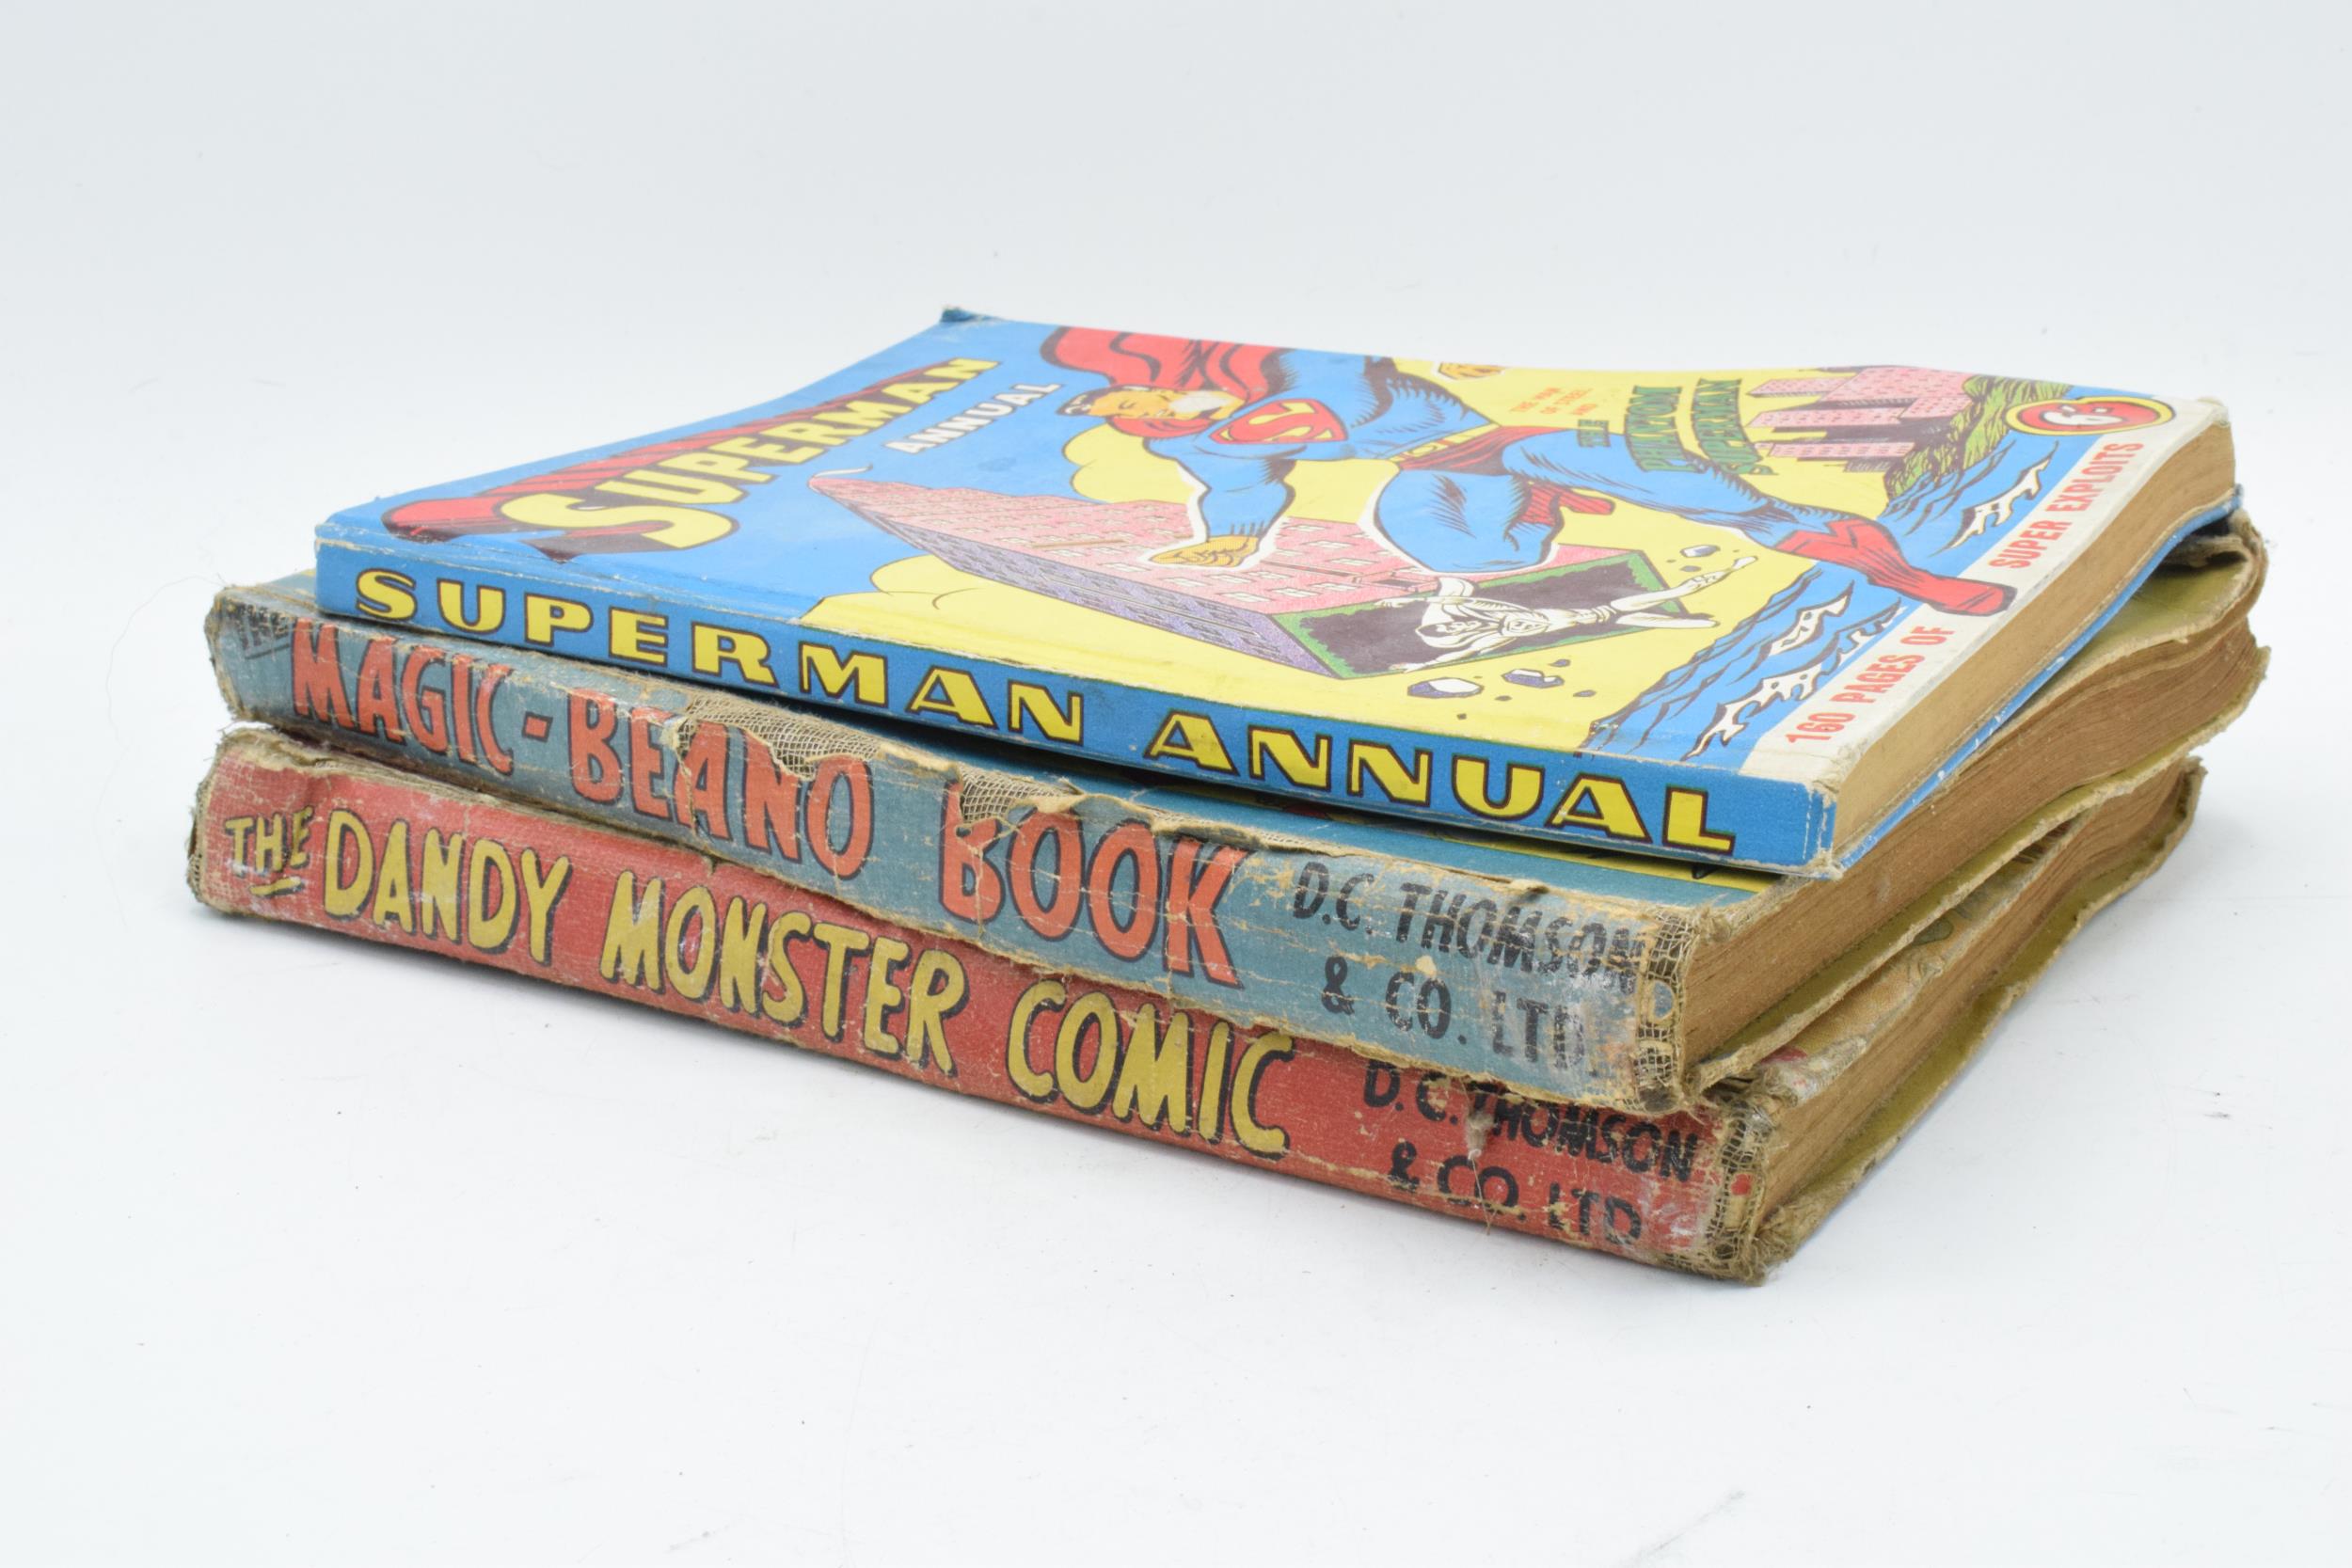 'The Dandy Monster Comic 1943', together with 'The Magic Beano Book' and 'Superman Annual 1958-9' (